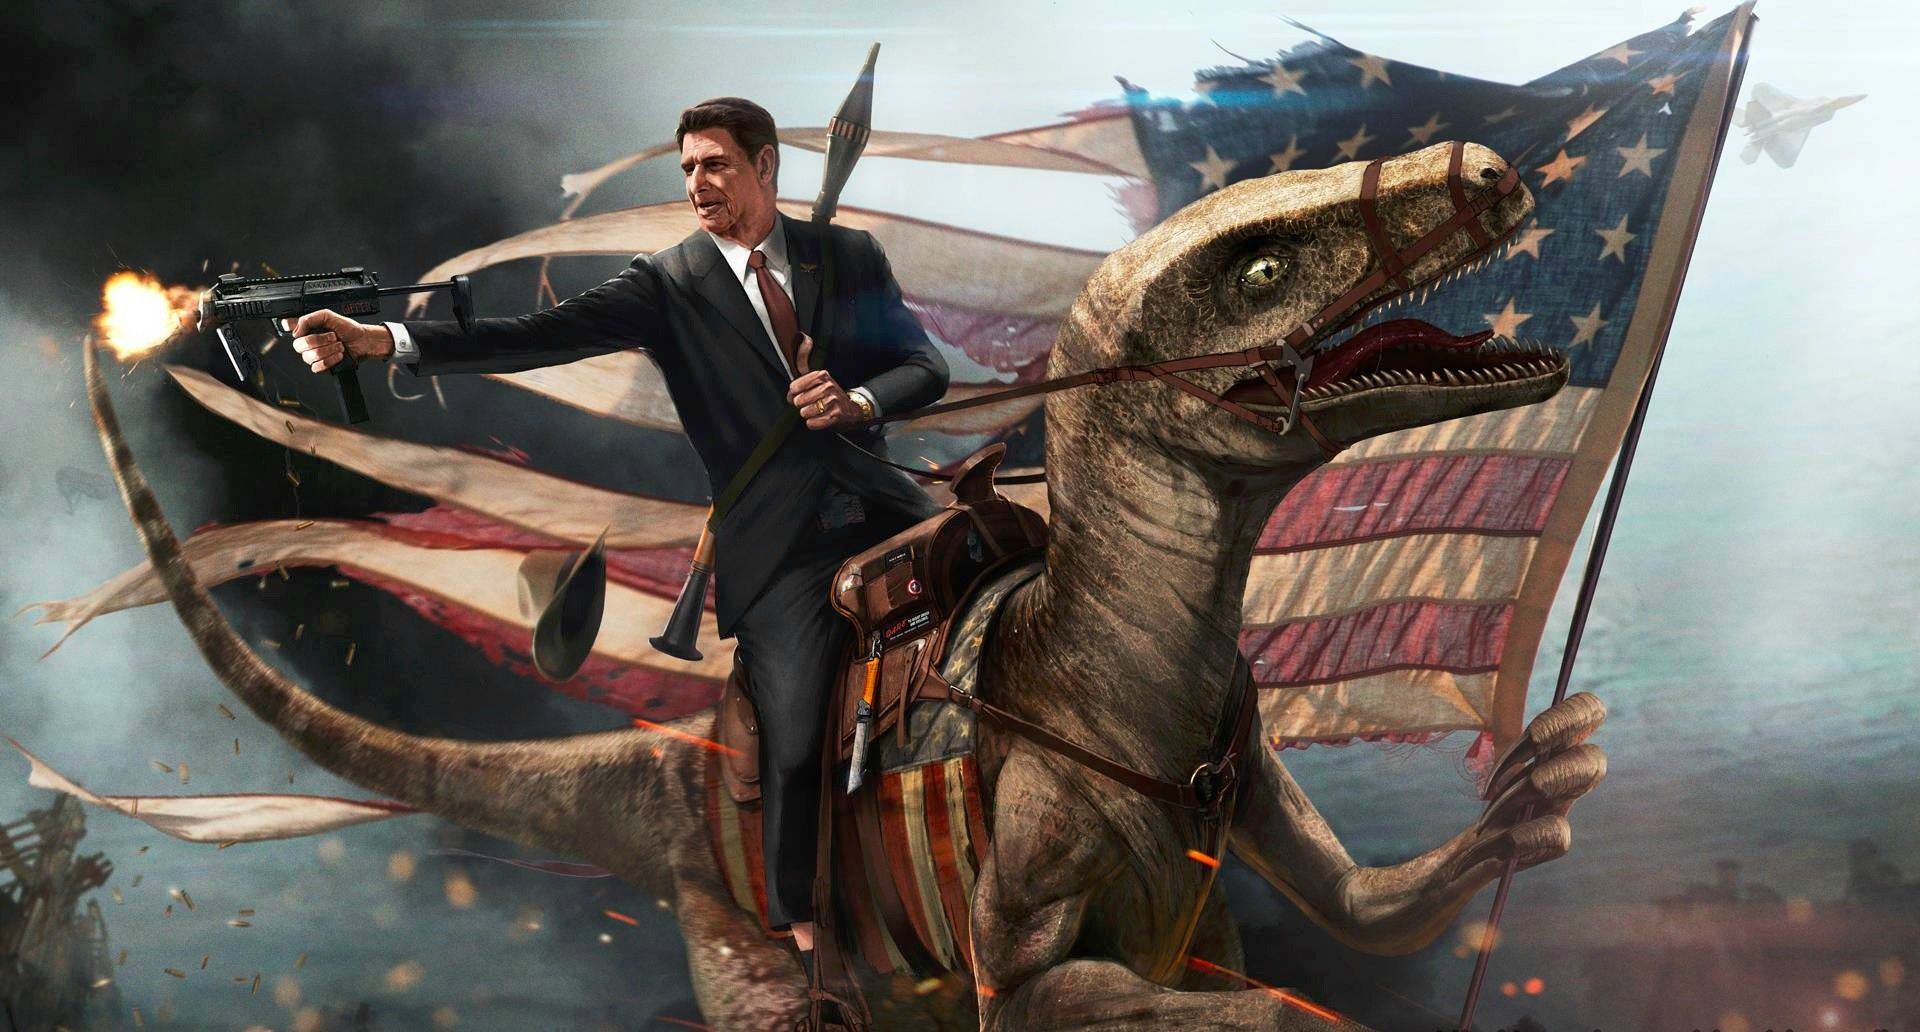 Searching through patriotic wallpaper and came across this gem. 'Merica